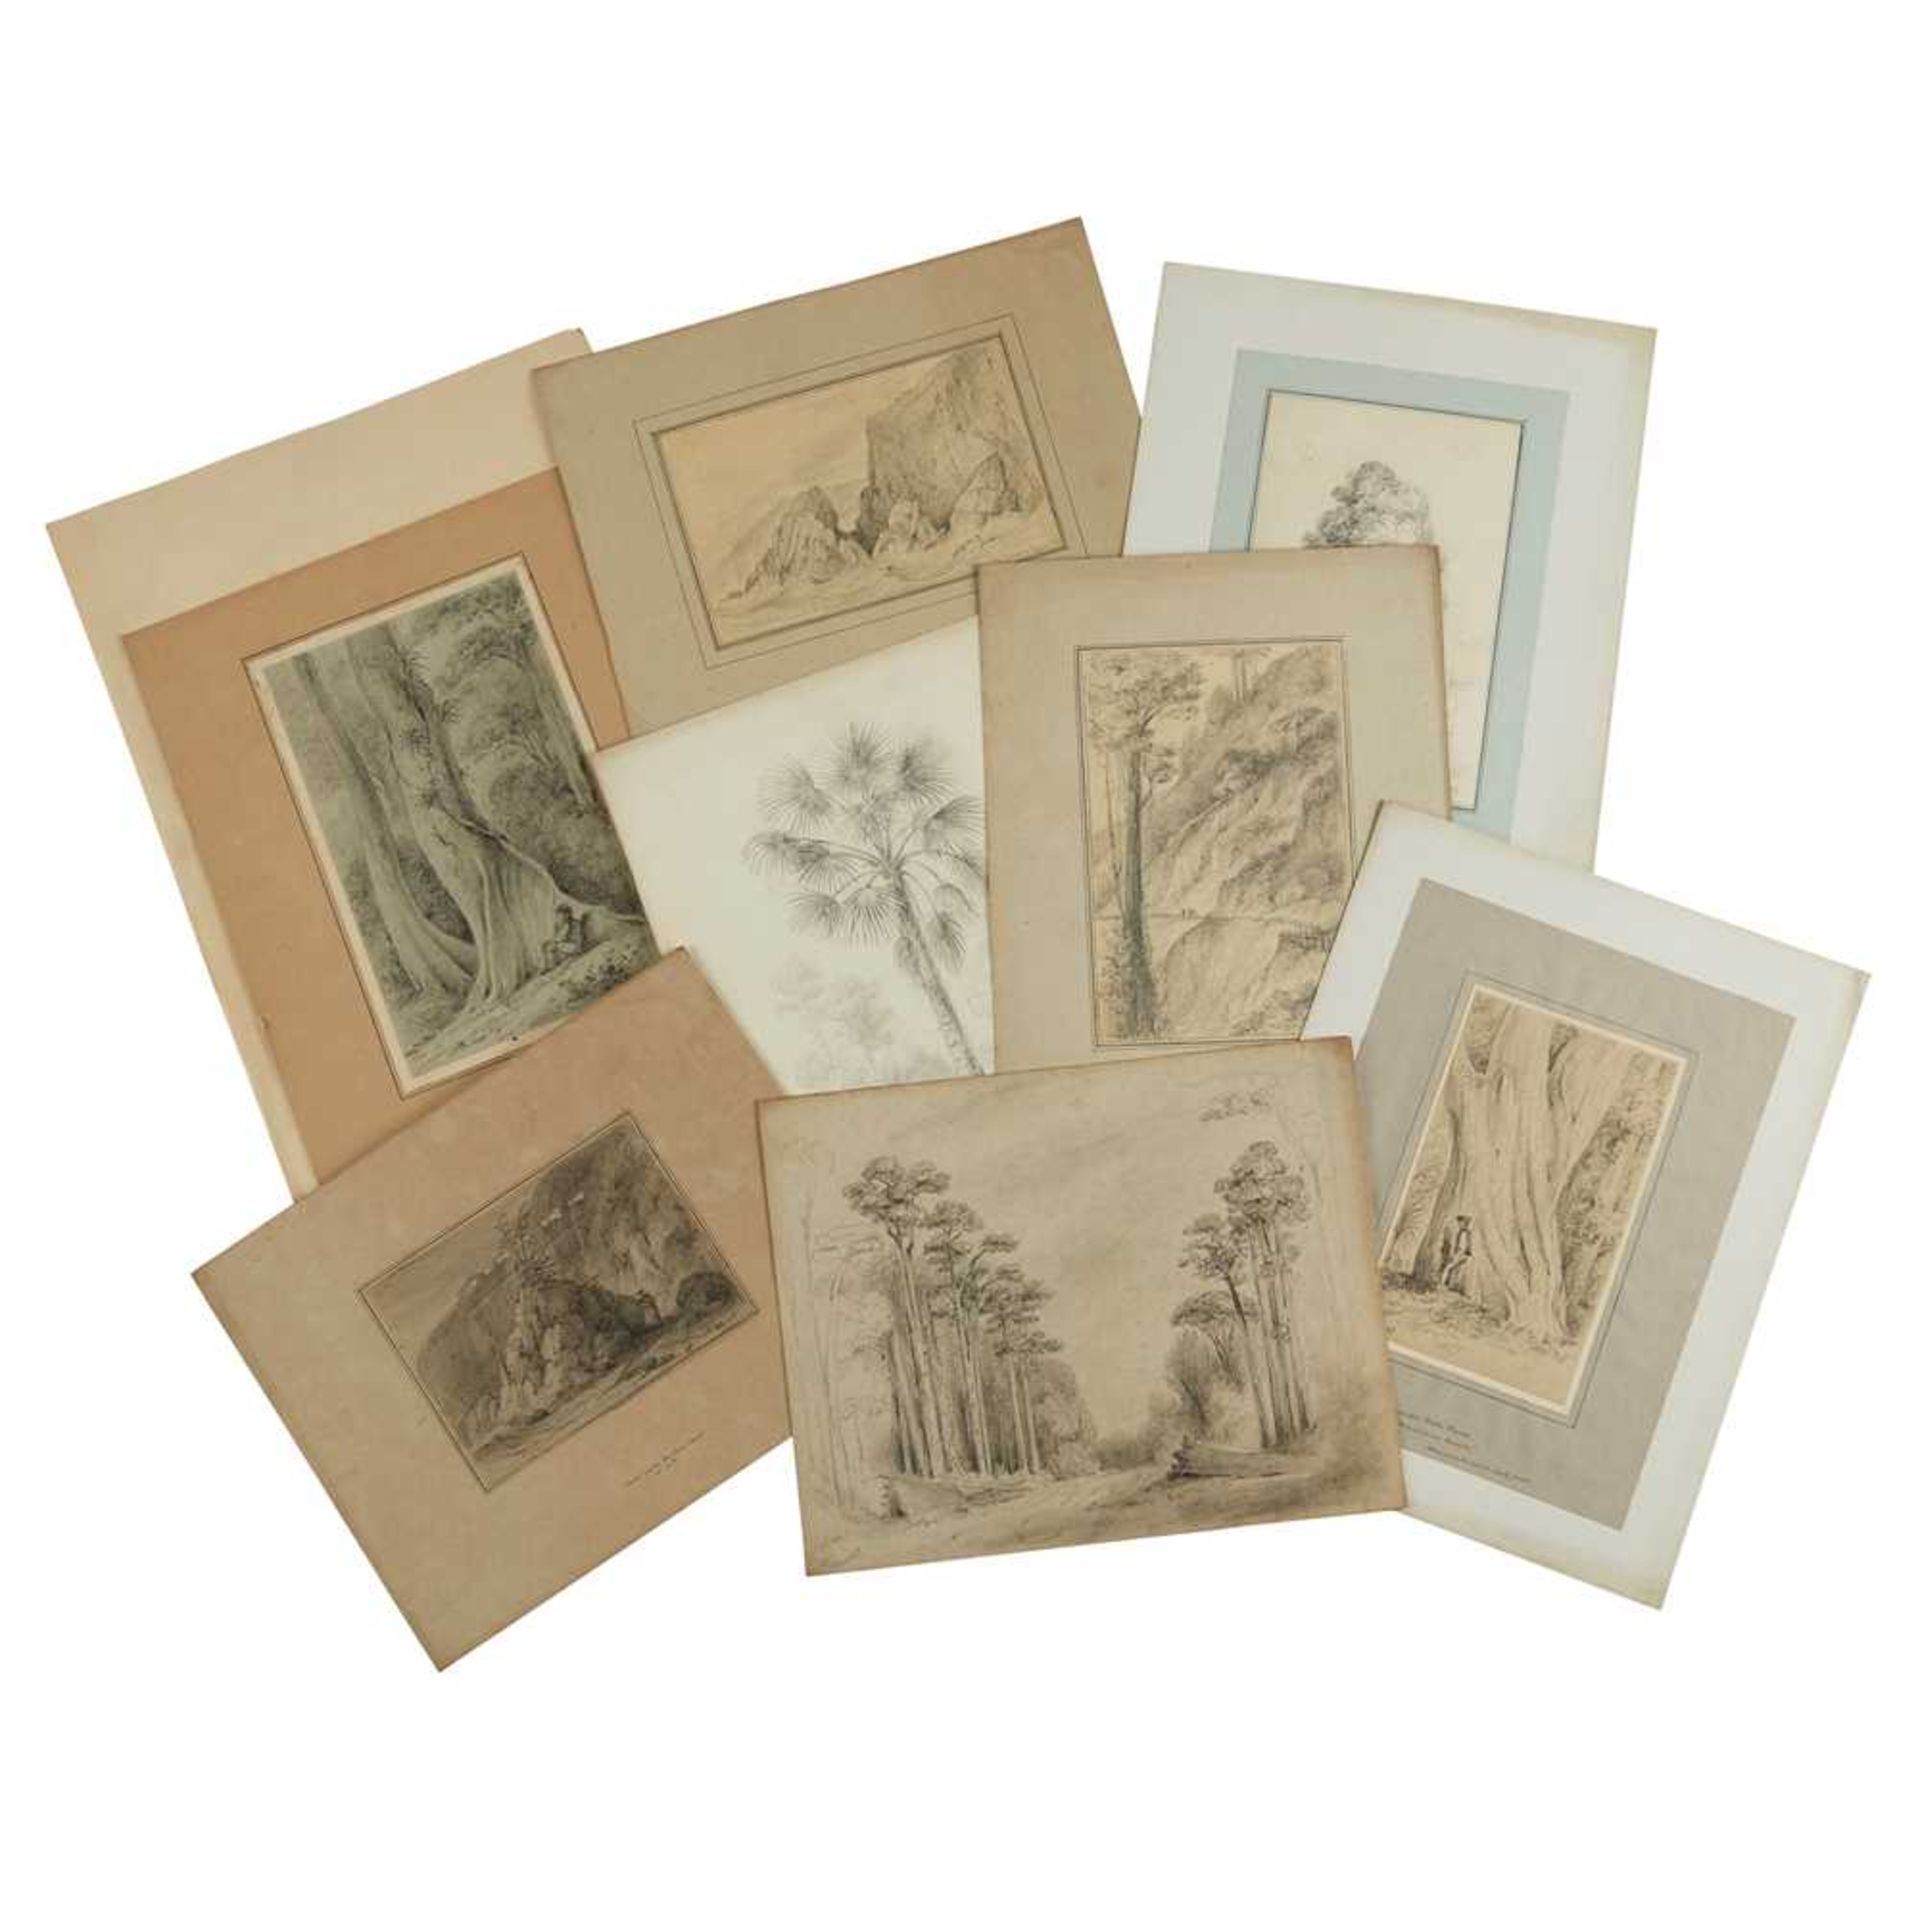 Swainson, William 67 pencil sketches of trees and landscape in New Zealand